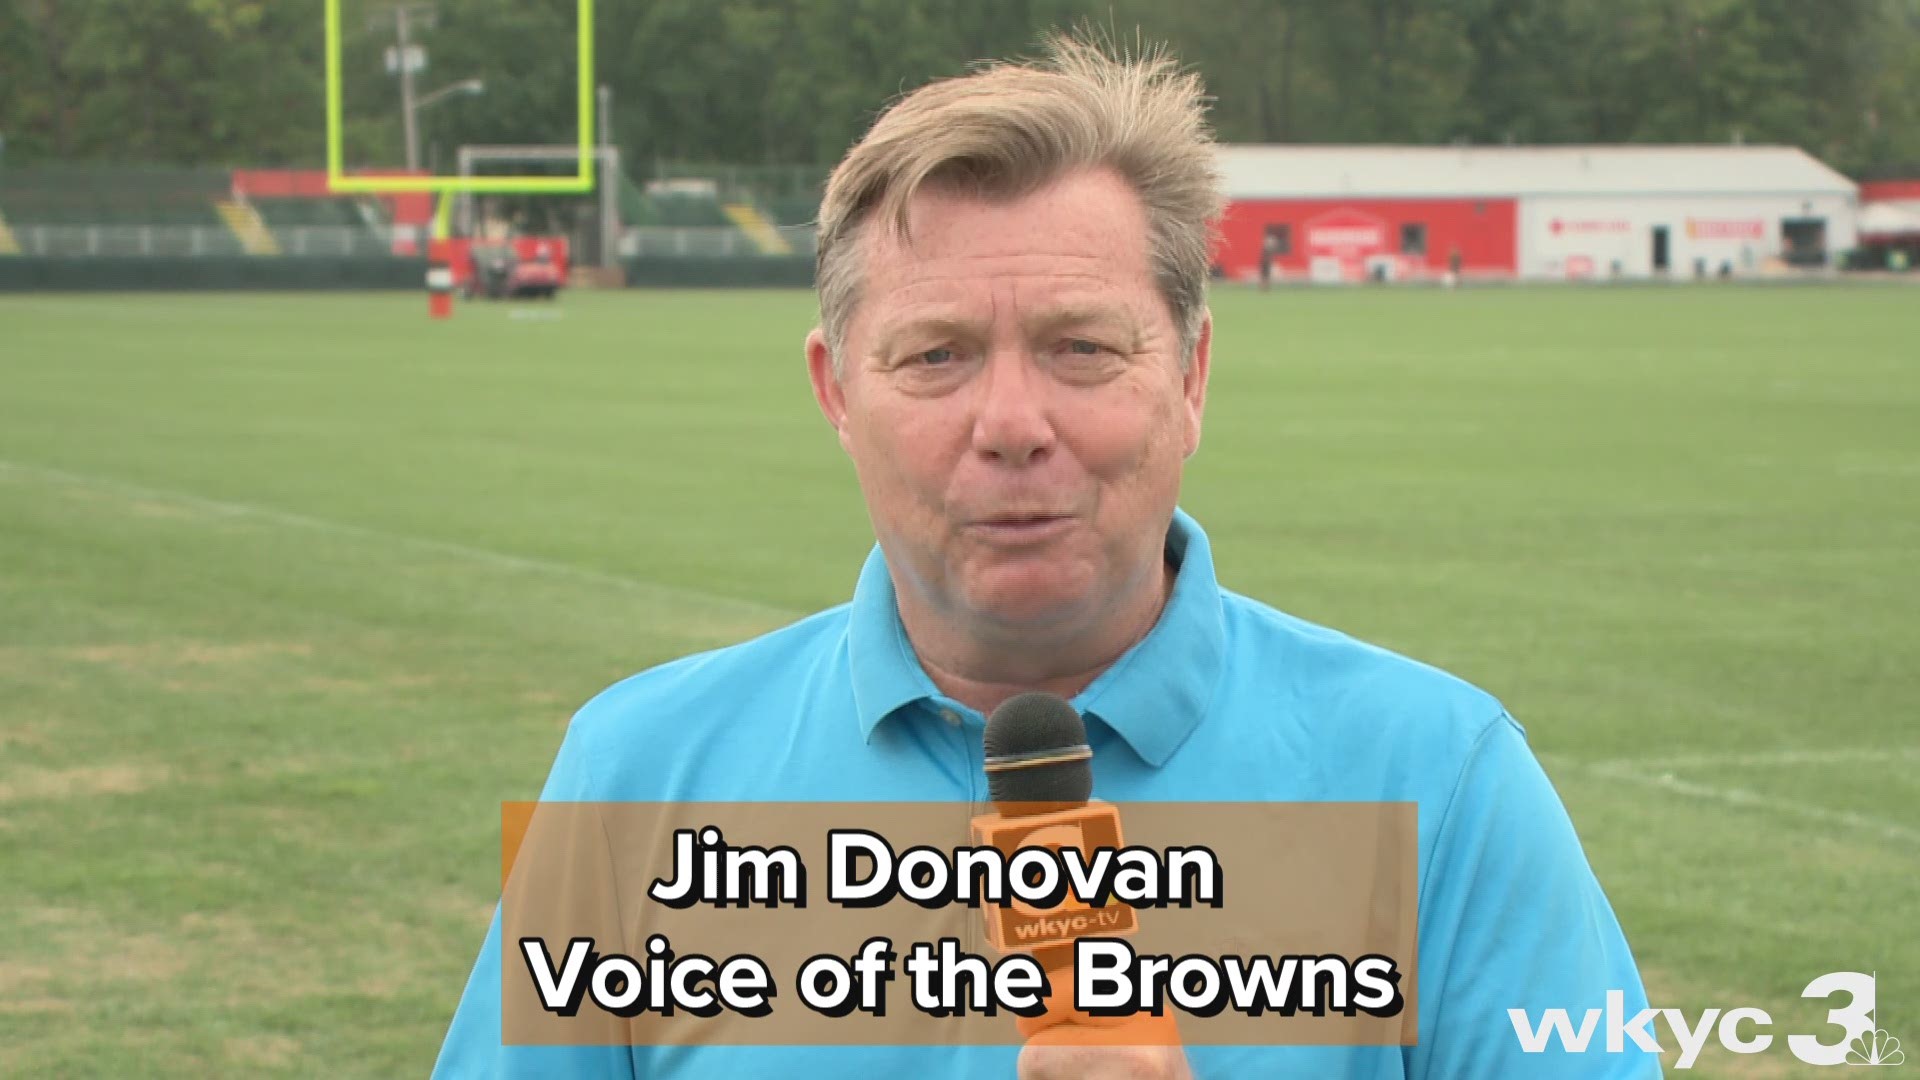 That's a wrap!  Jim Donovan recaps the final day of training camp open to the public in Berea.